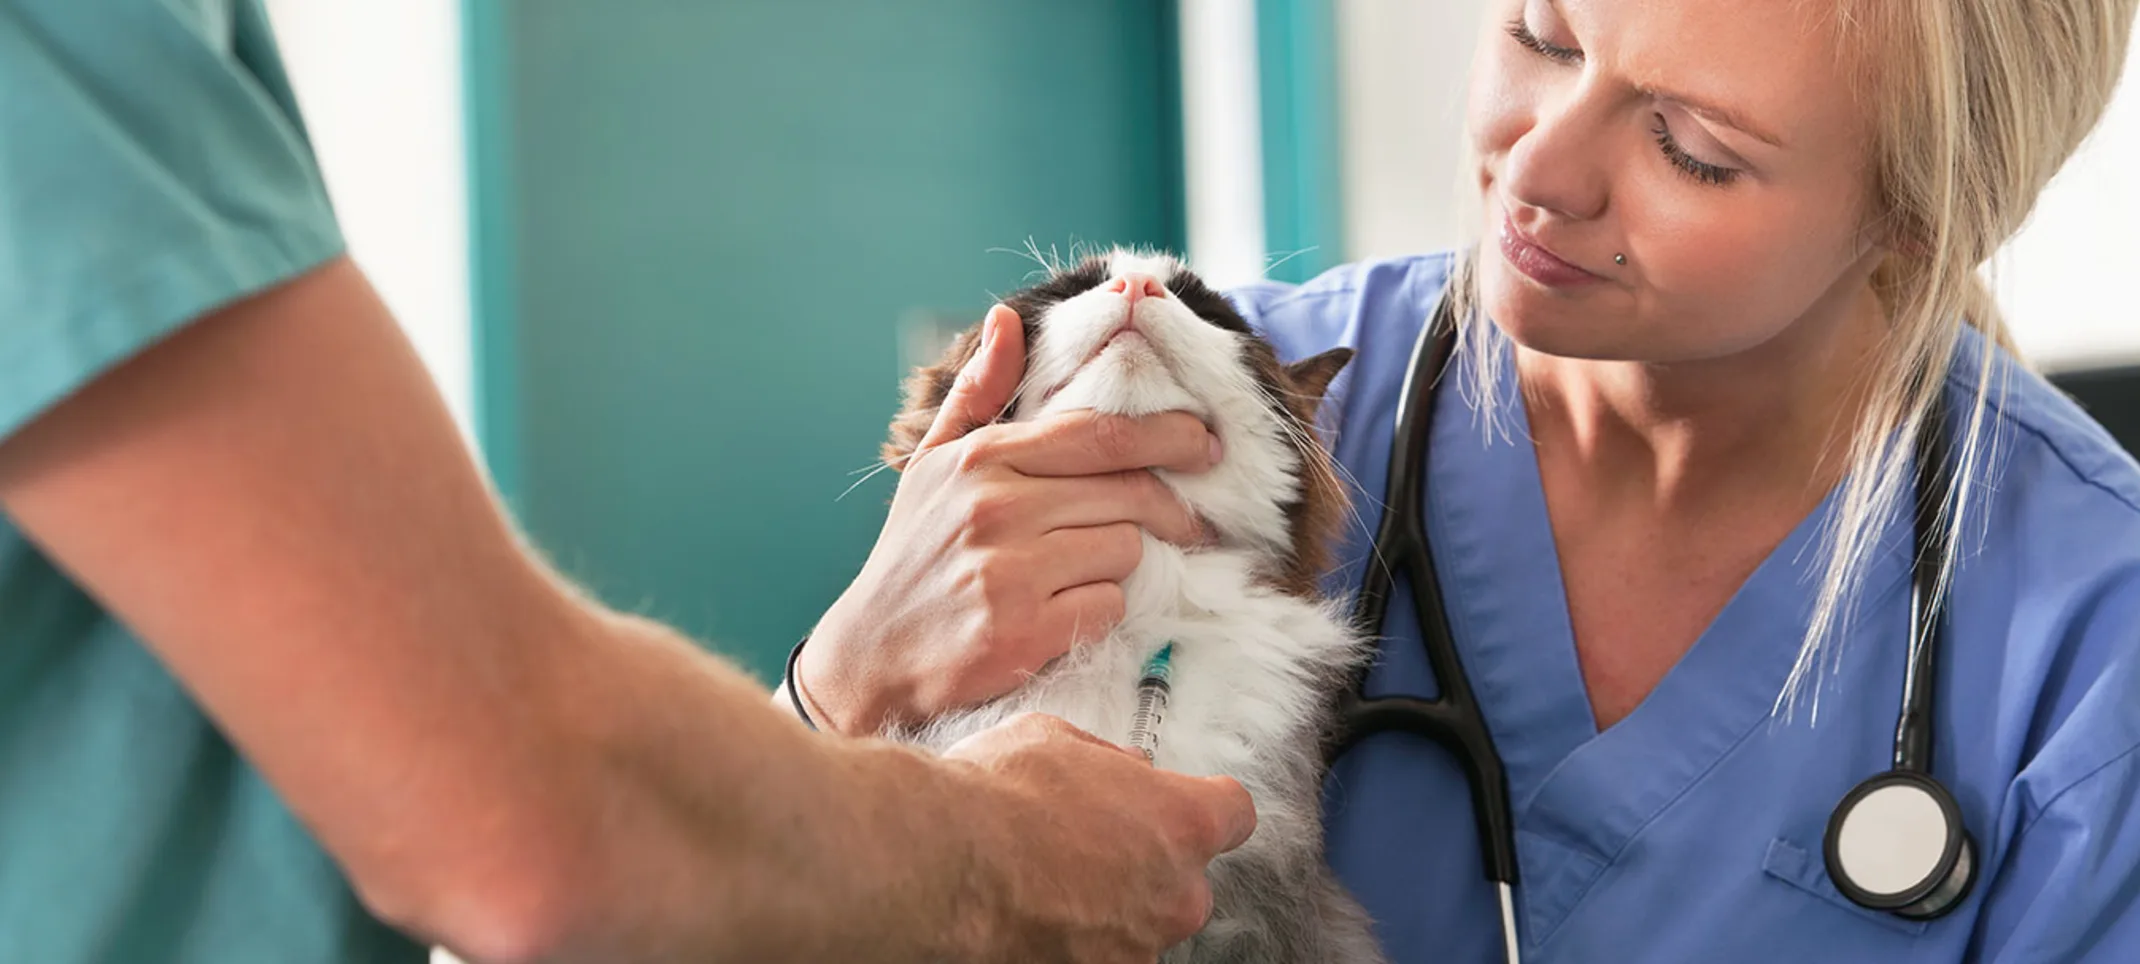 Female doctor holding cat with male doctor administering shot